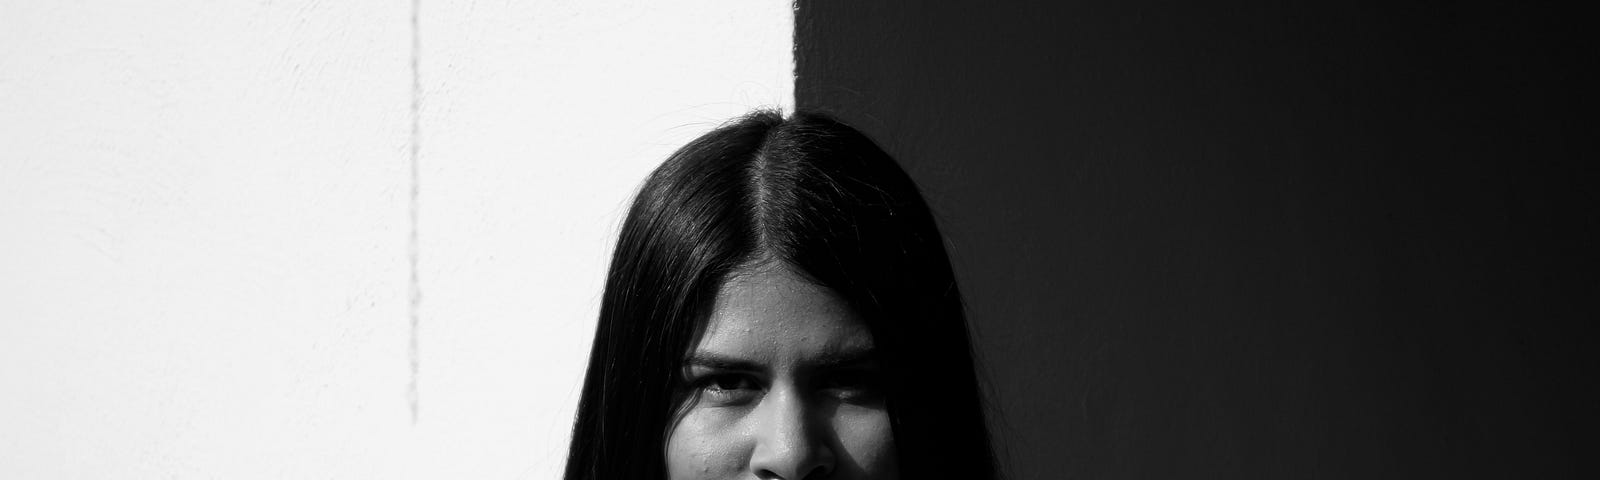 A black and white photo of a medium-skinned woman with long straight black hair parted in the middle. She is wearing a white, off-shoulder ruffled top with a dainty, heart-shaped necklace. She has a closed-mouth smile and is standing in front of a wall that is white on the left and black on the right, though it may be edited to look as such.